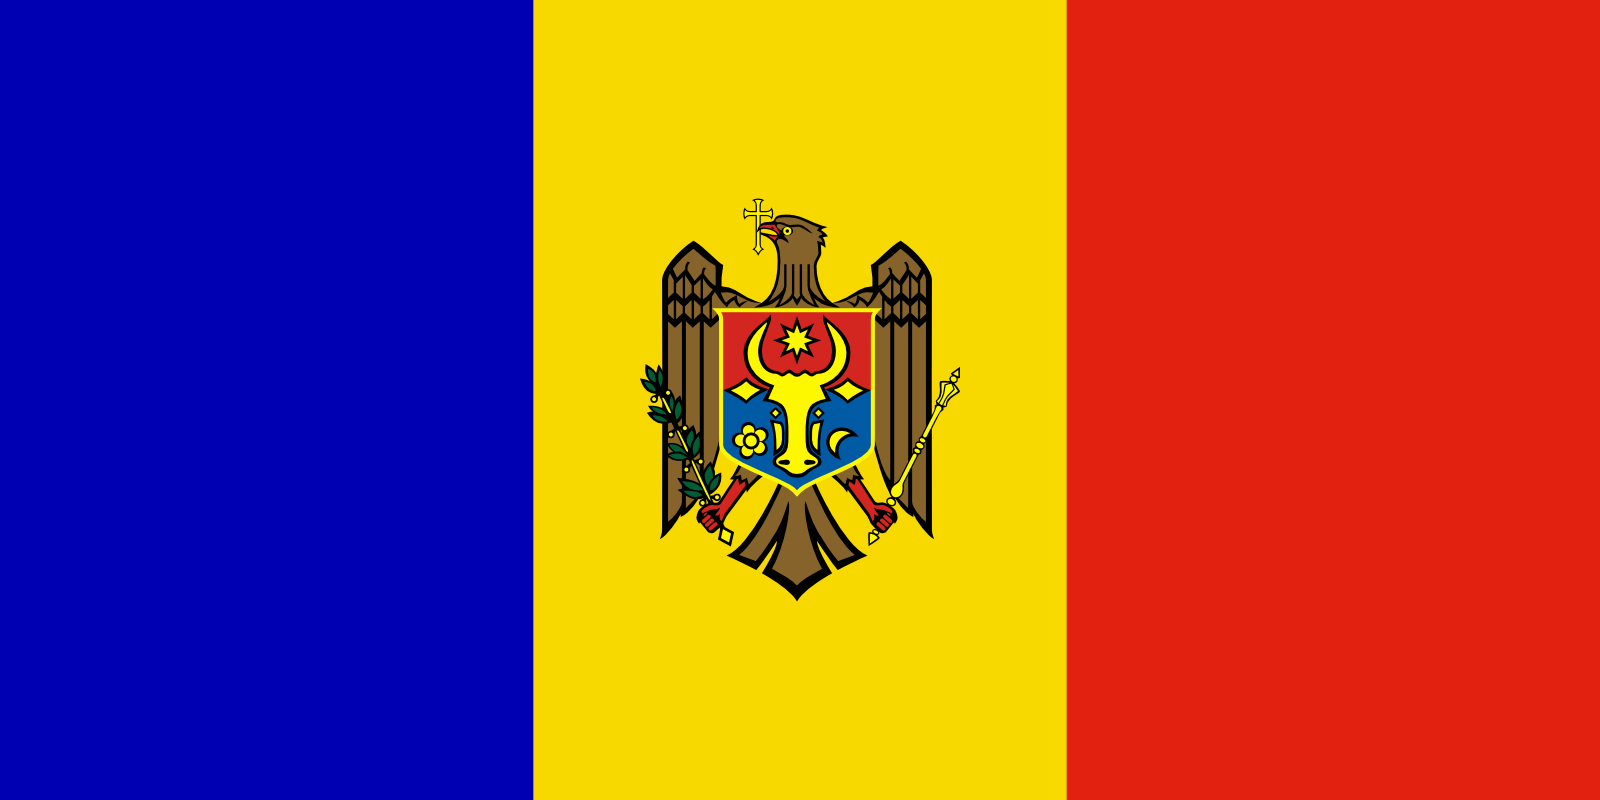 Commission proposes EUR 100 million in Macro-Financial Assistance to the Republic of Moldova